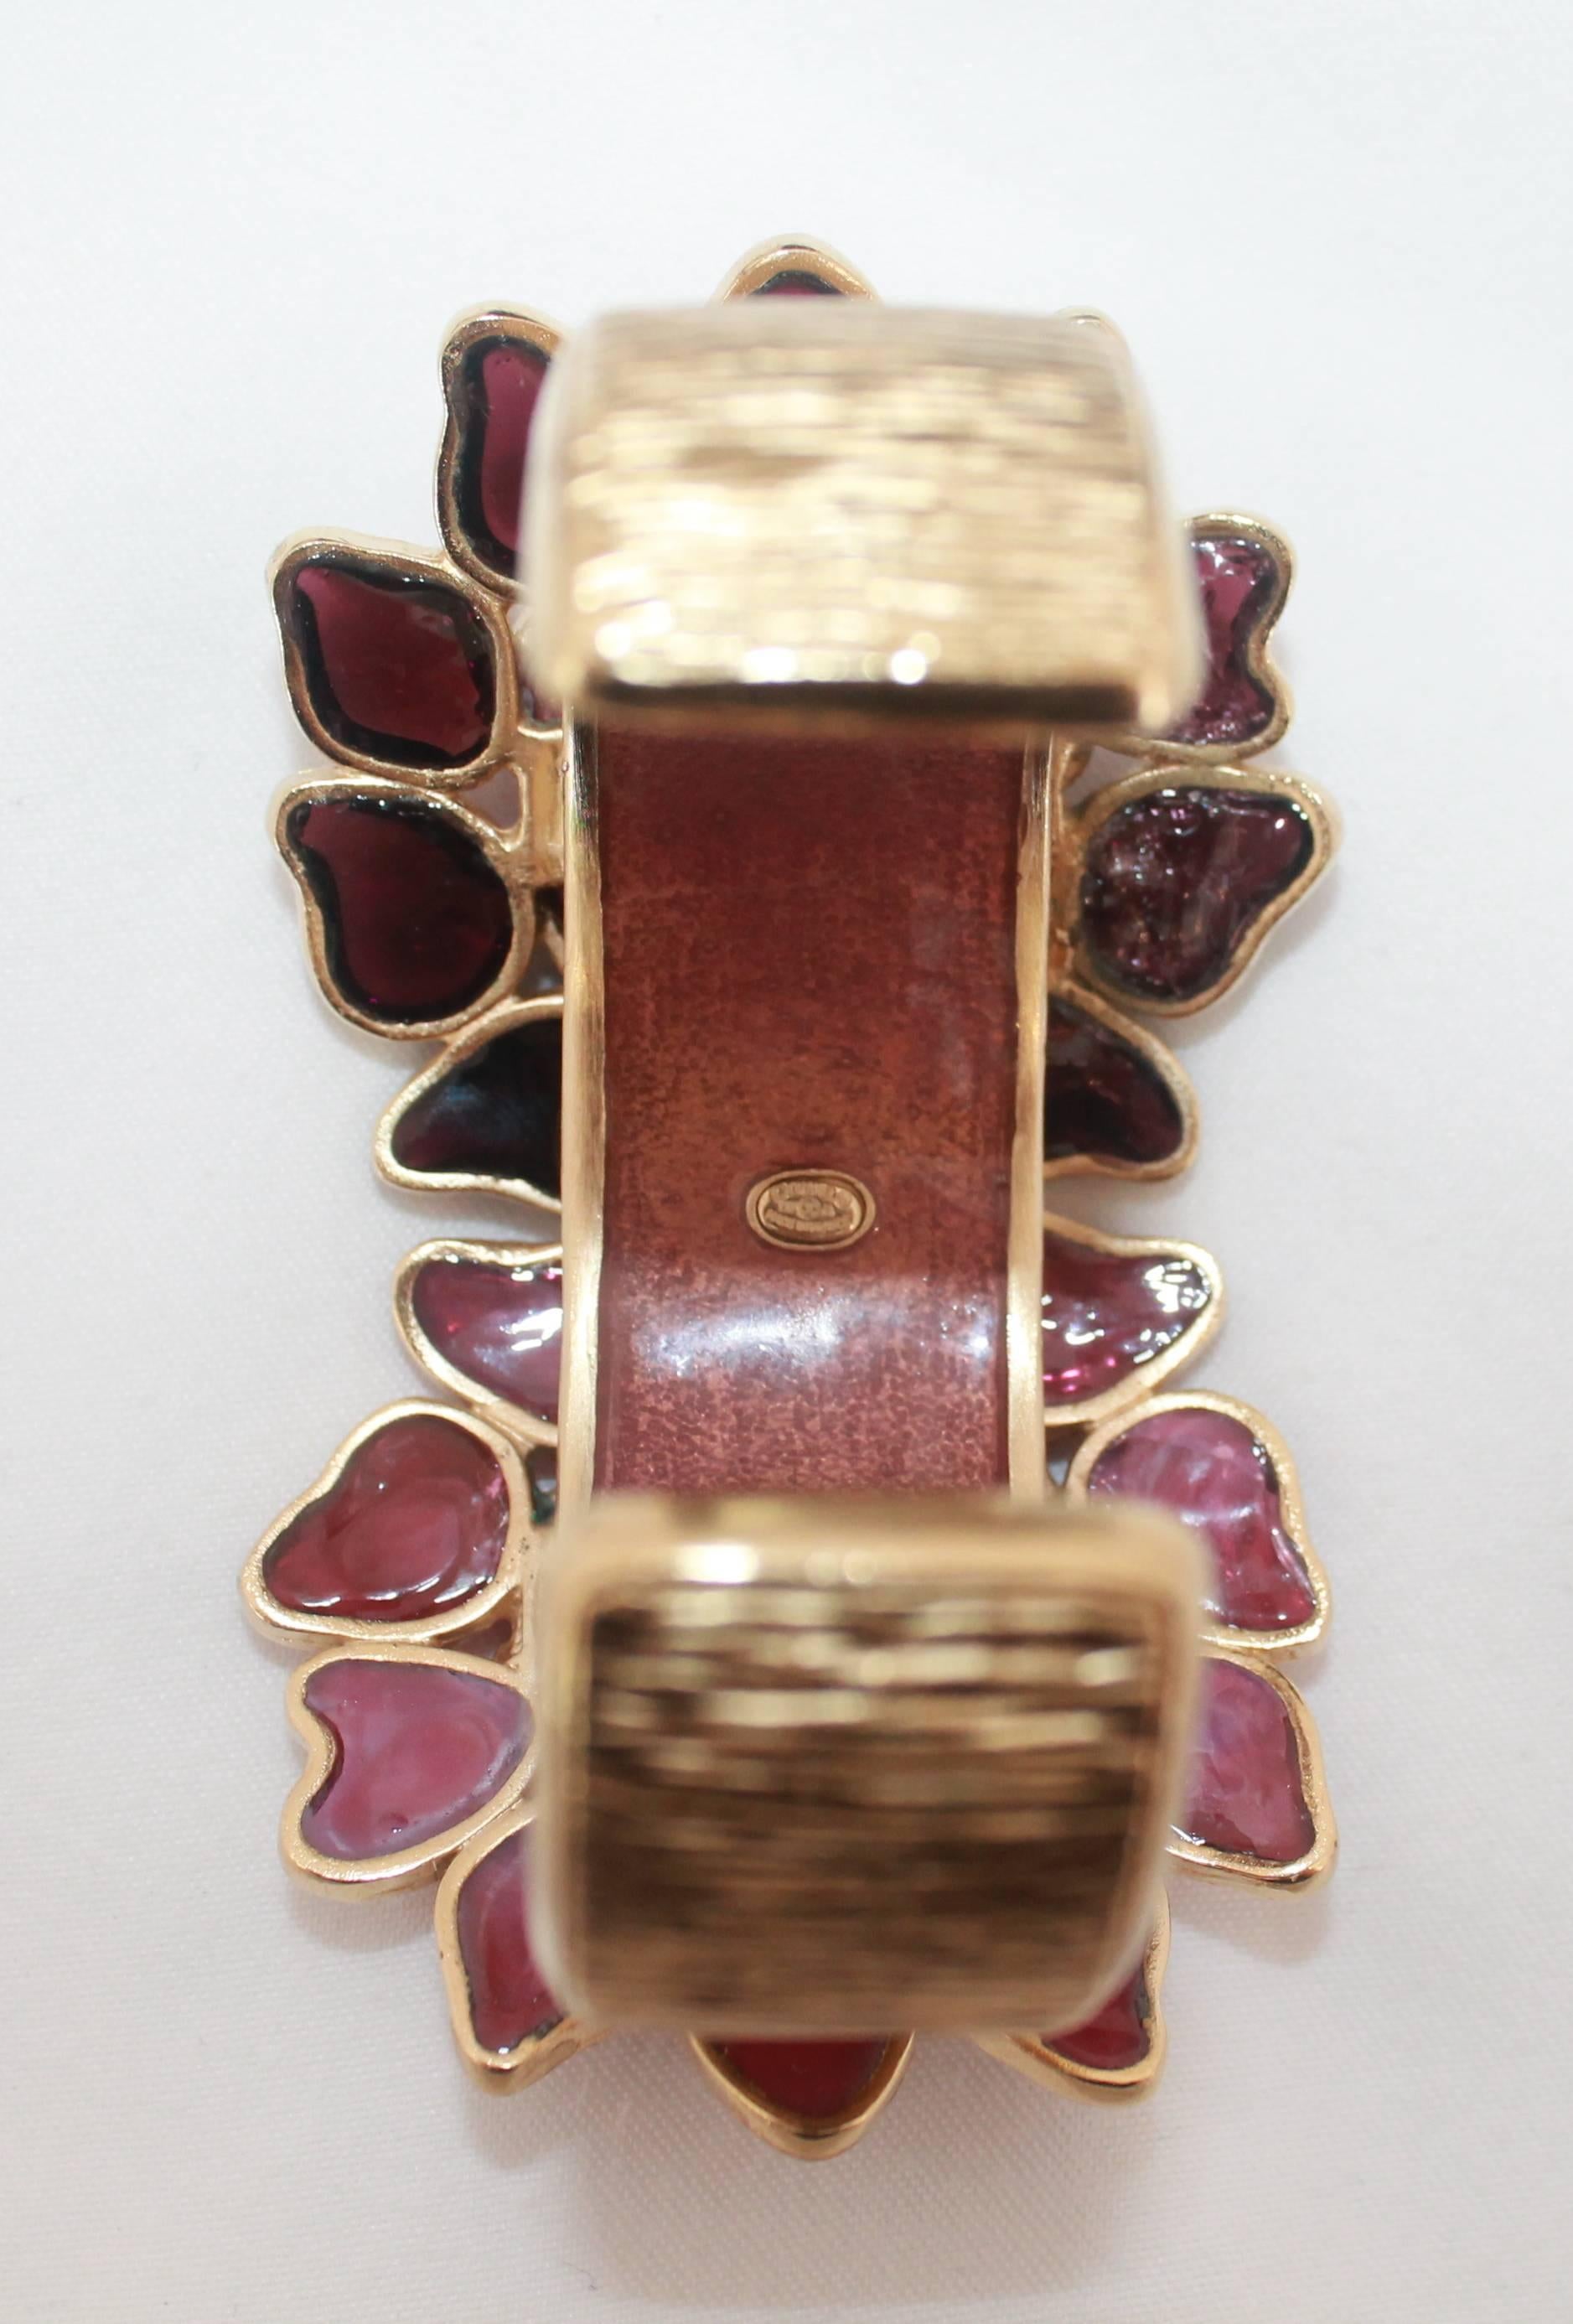 Chanel Purple/Pink Gripoix Gold Byzantine Paris-Dubai Cuff-2015  This beautiful collectible cuff has a textured feel on the gold part of the cuff. The gold cc logo is on the front of one of the two floral gripoix pieces. This cuff comes with the